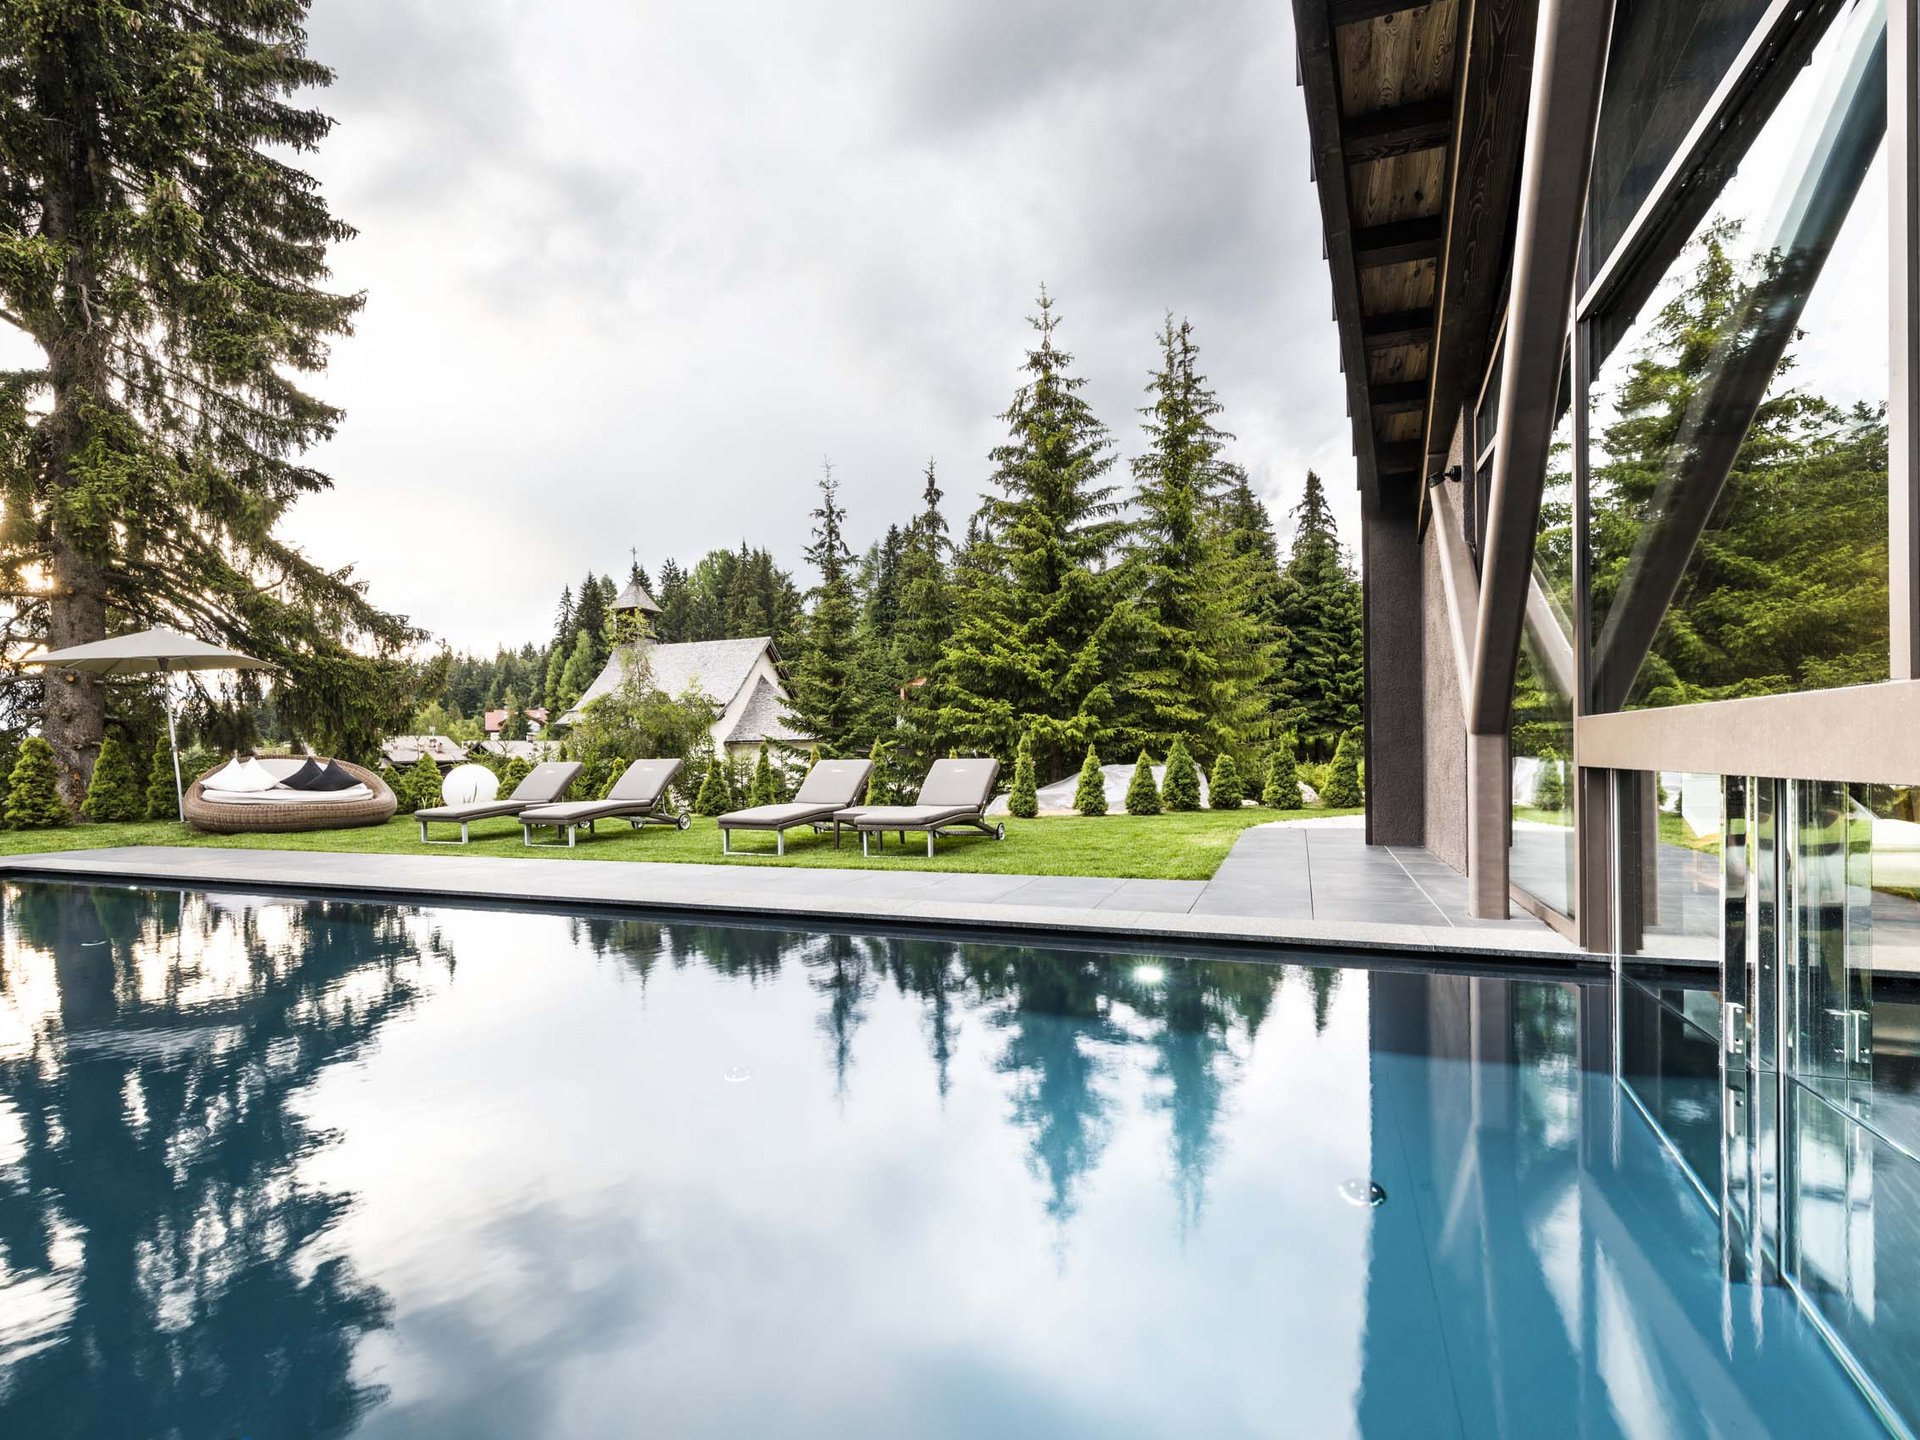 The most beautiful photos from our hotel in the Dolomites